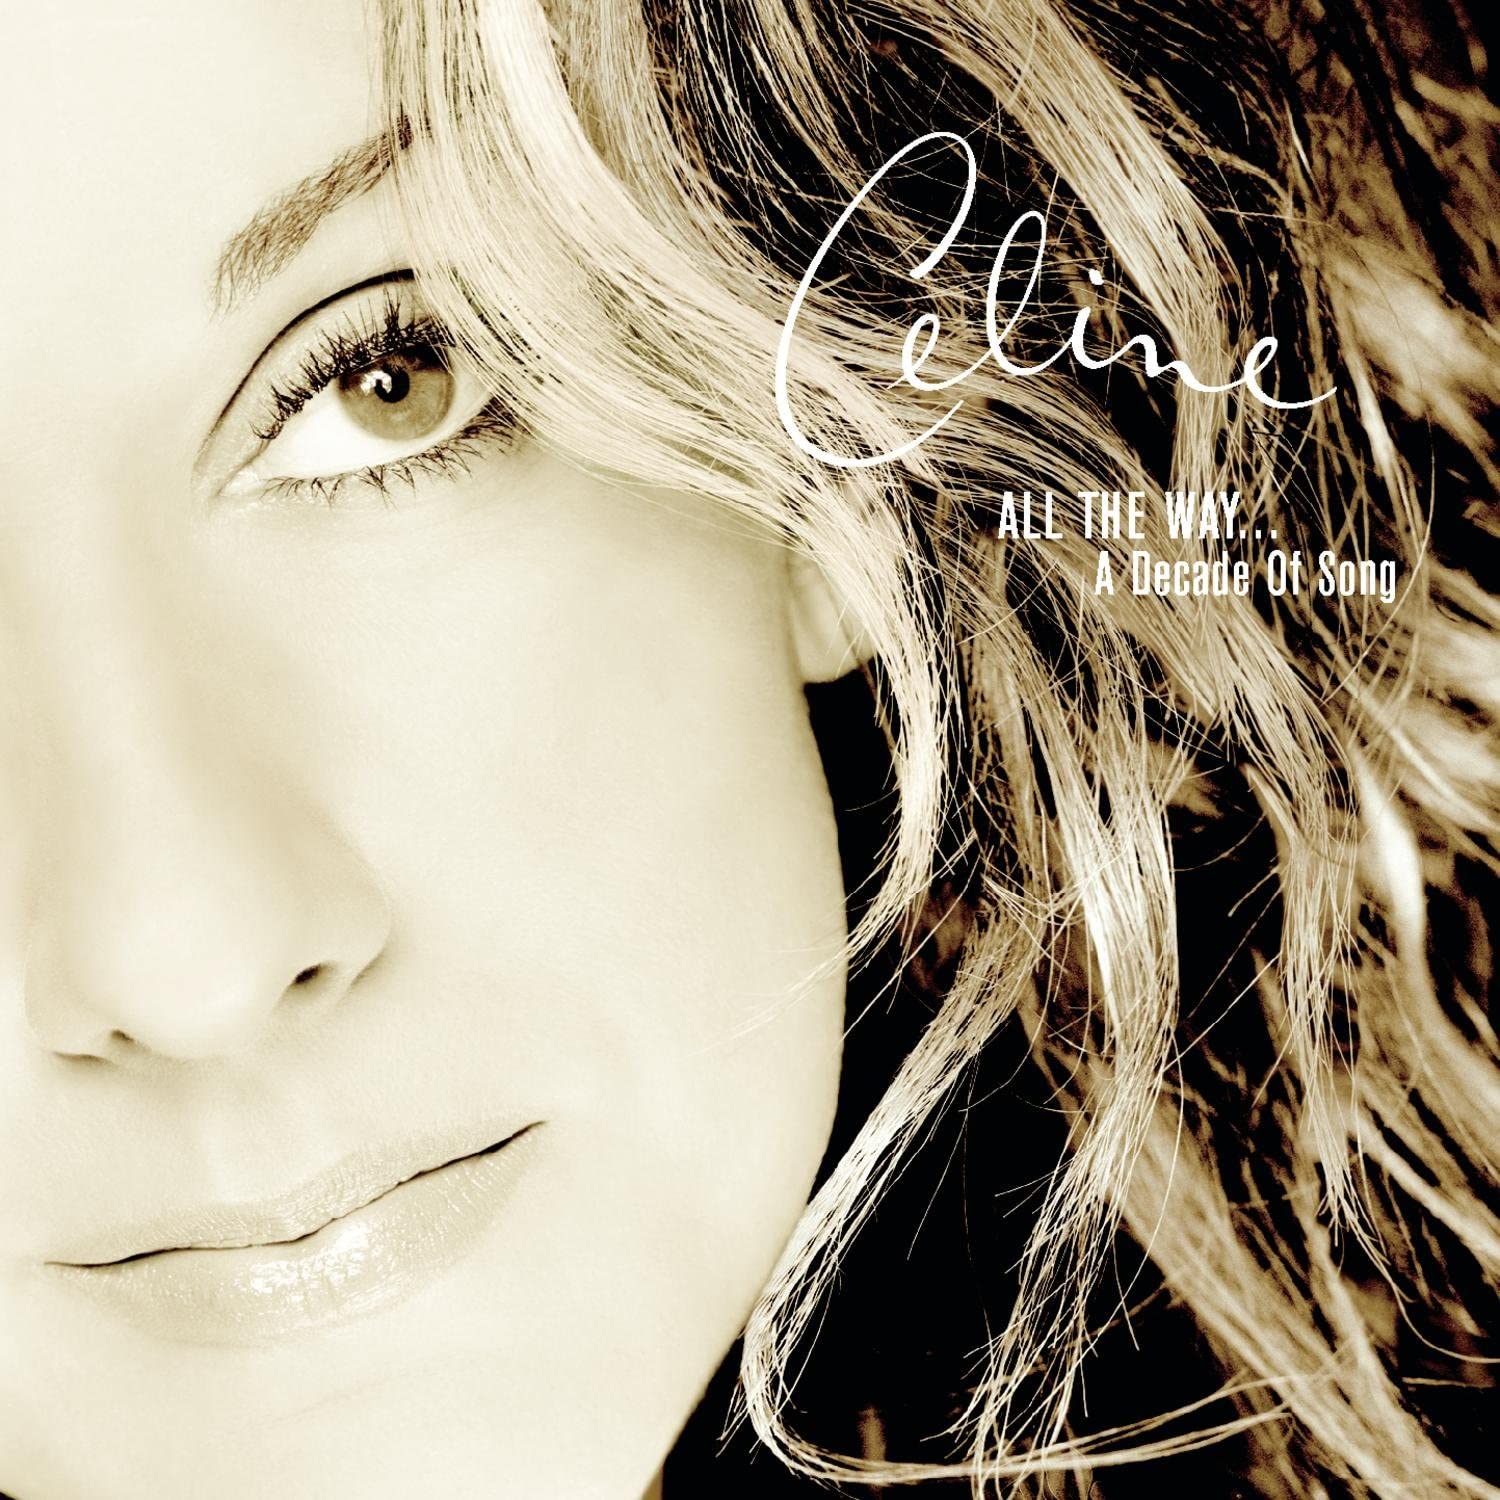 Celine Dion - All the way A Decade of Songs